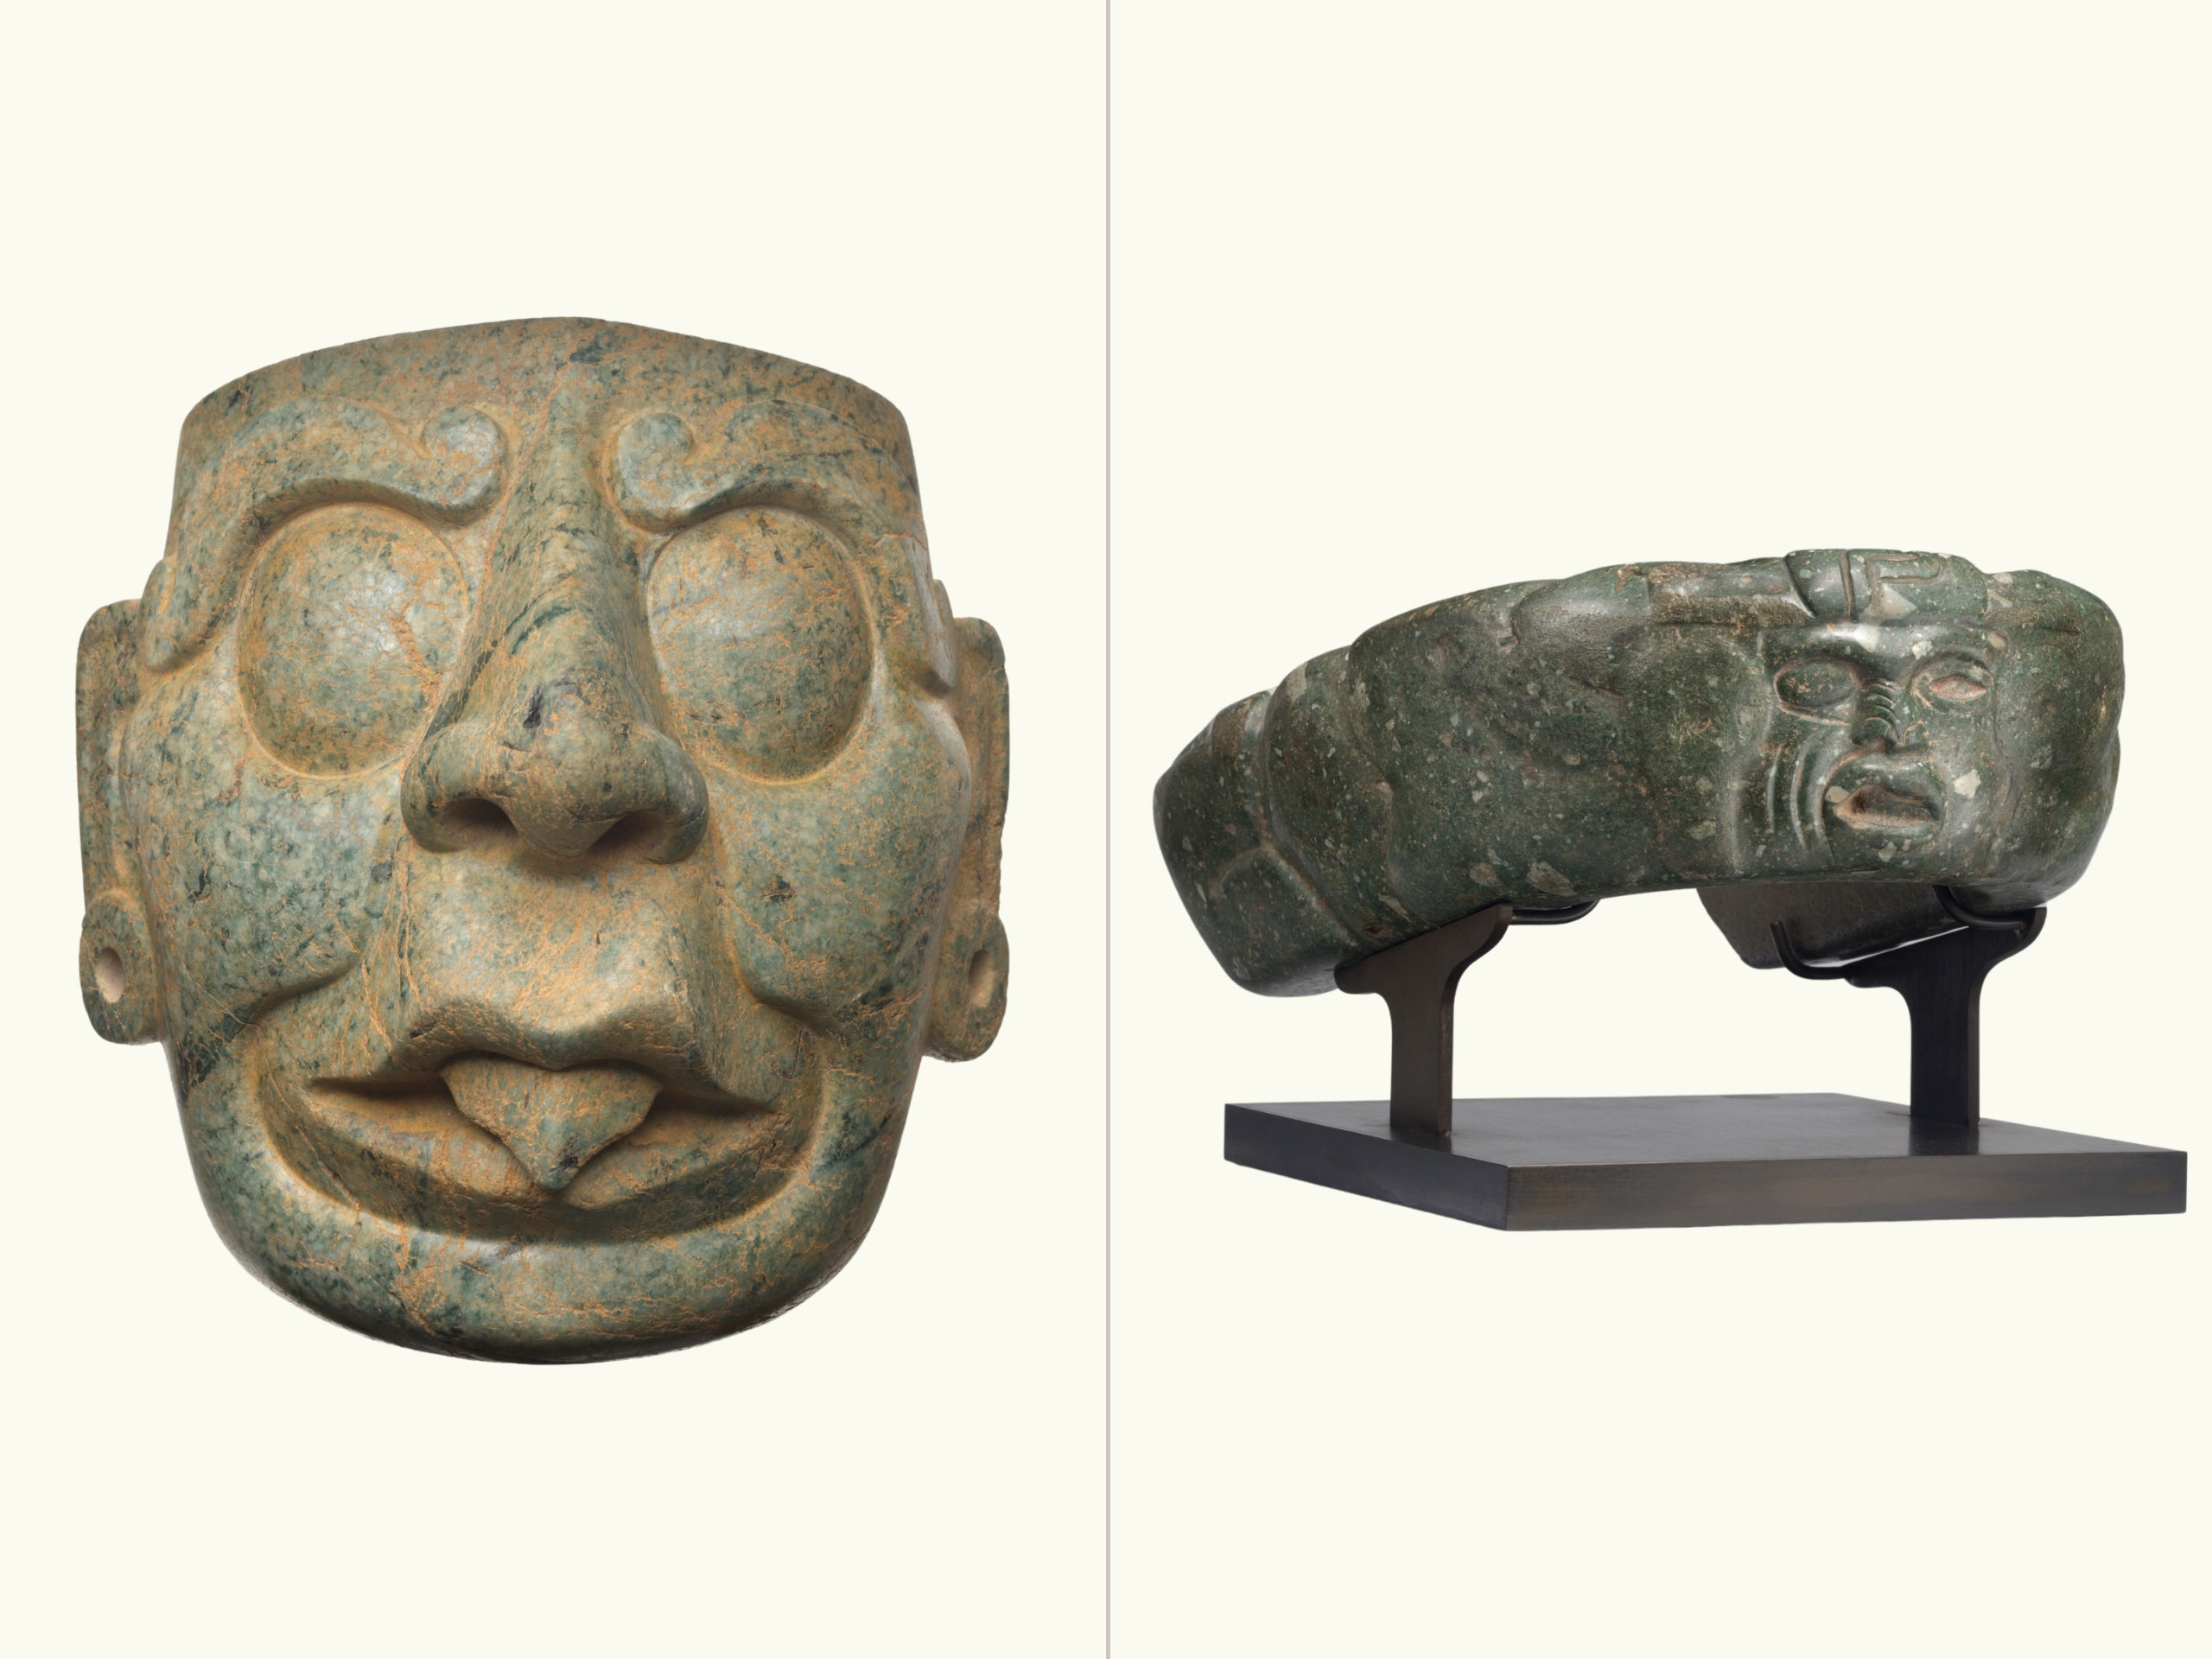 A comparison of two Maya works: an expressive stone mask with protruding tongue (left) and a stone yolk (right).